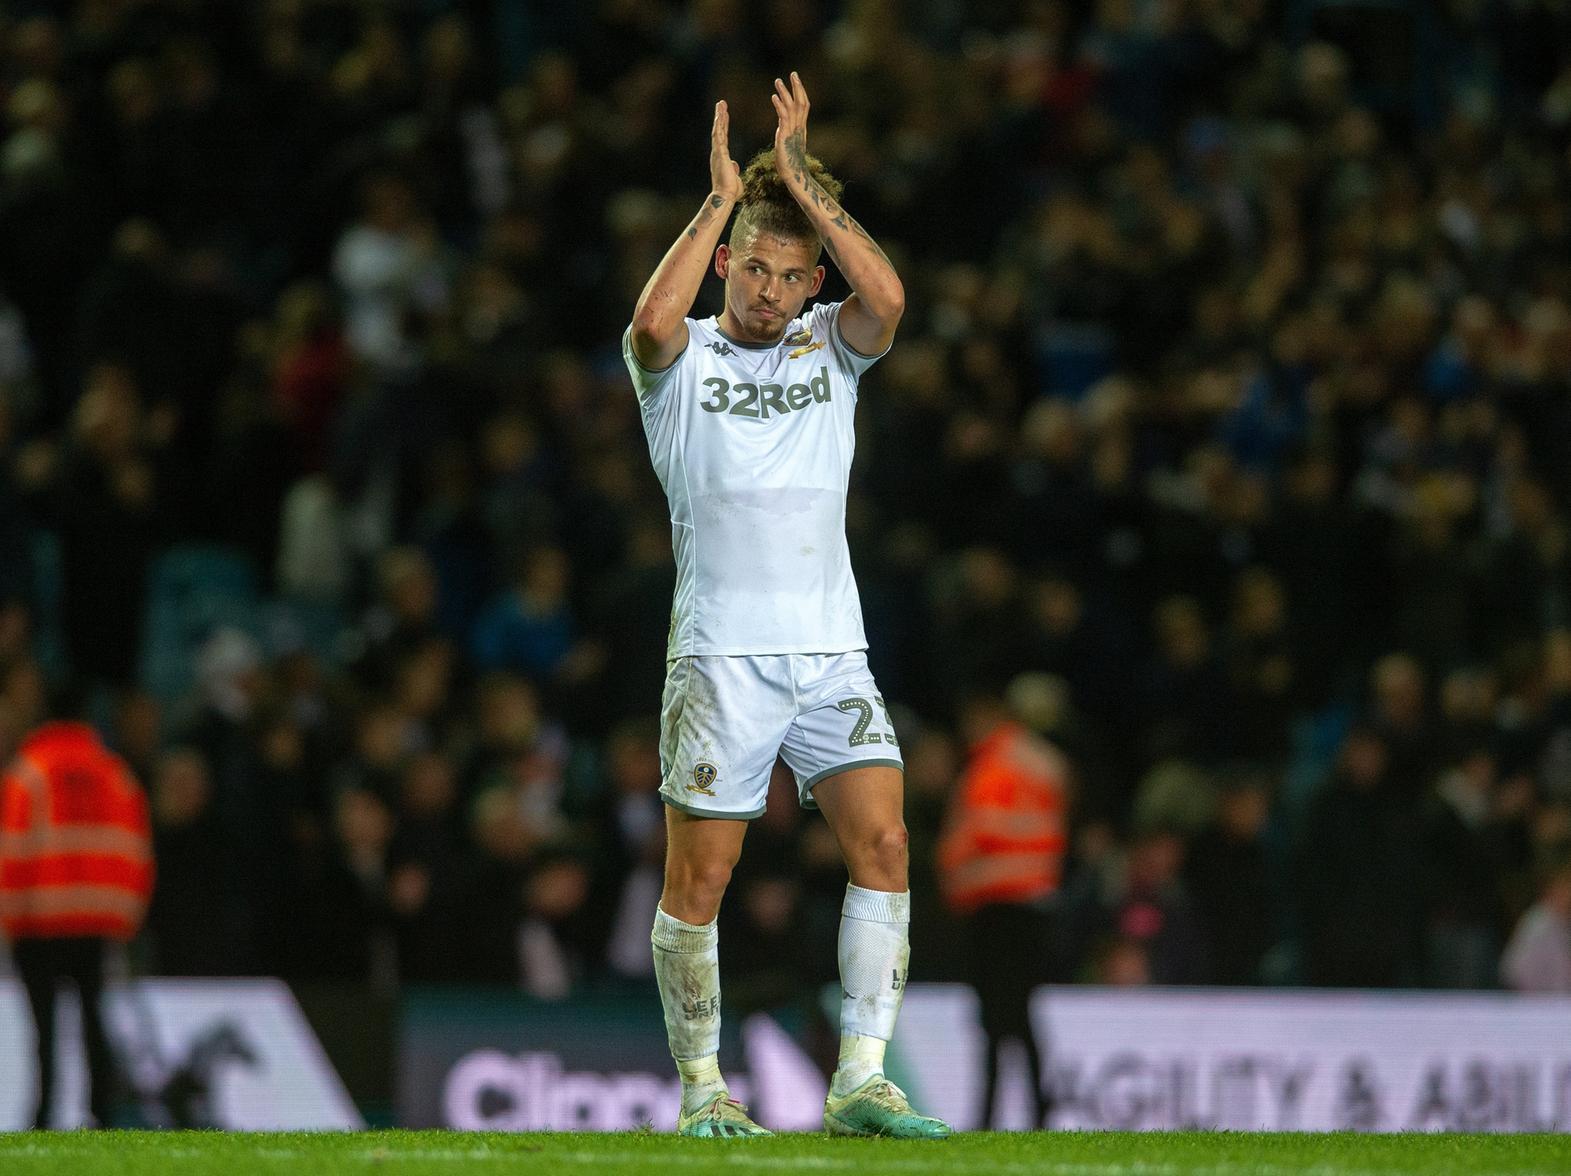 6 - Attempted to get Leeds going in building Whites attacks after conceding early and did his best to cope with Pereira who is top of the Championship's assists charts.